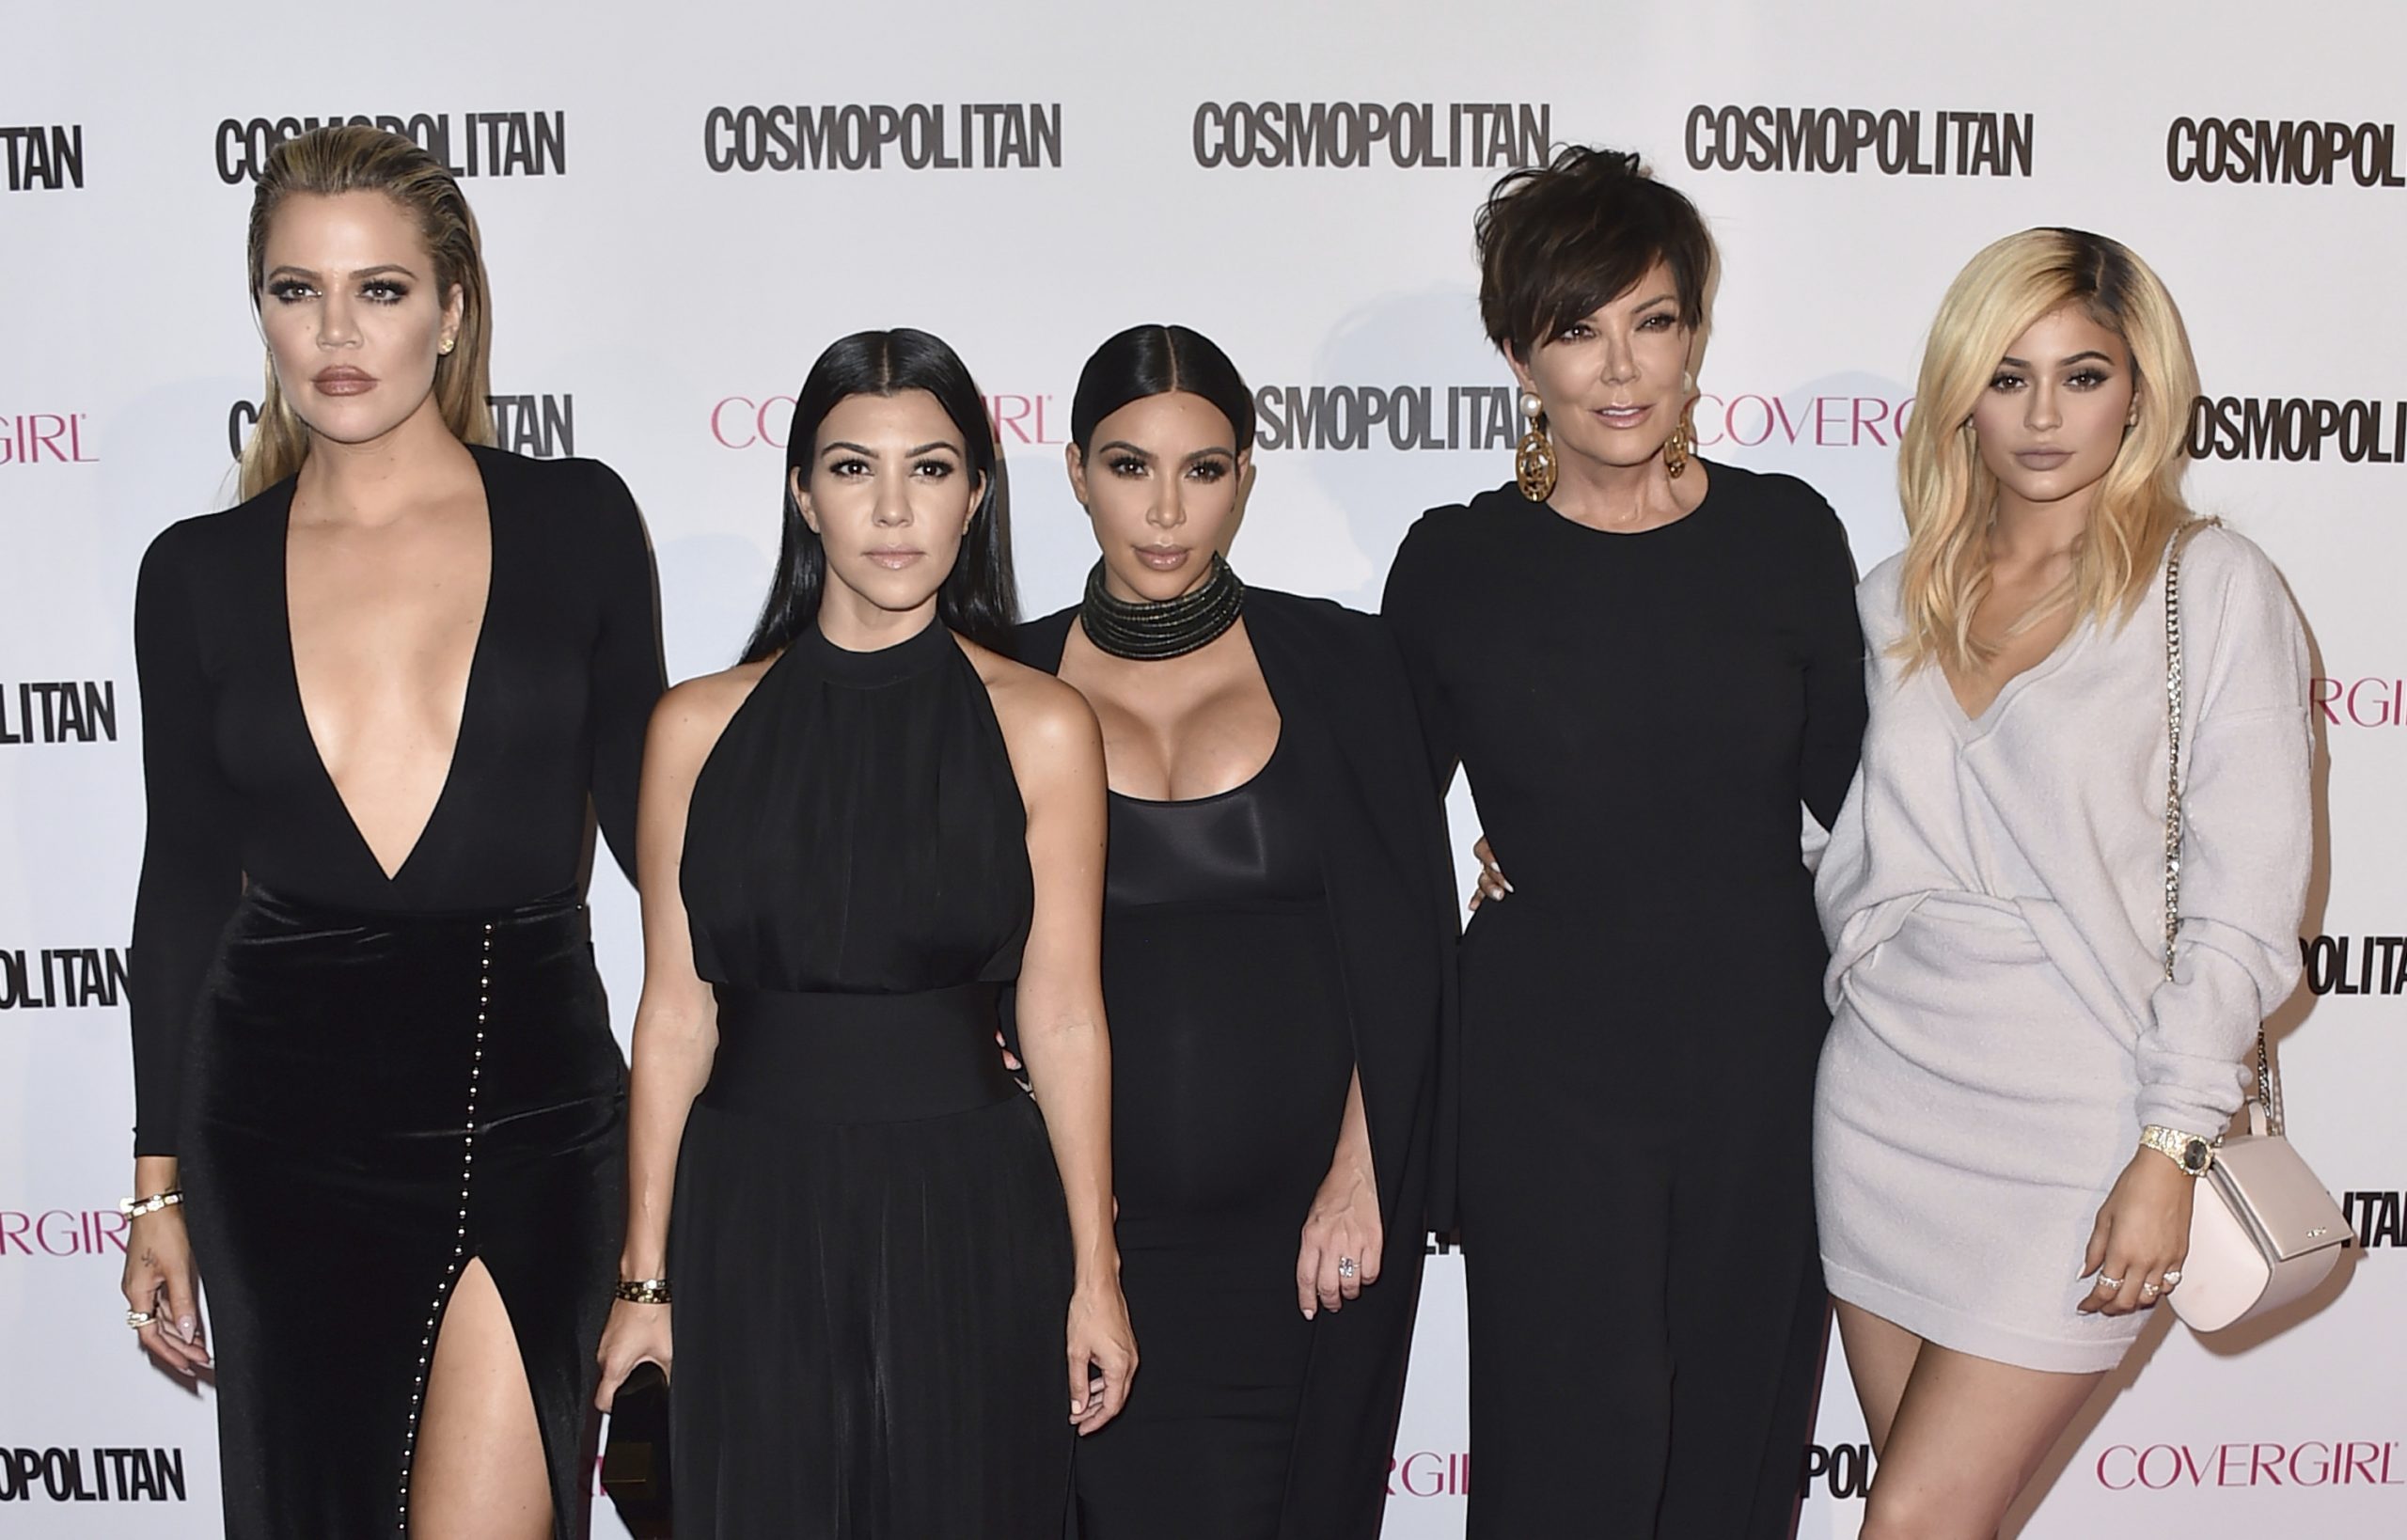 FILE - Khloe Kardashian, from left, Kourtney Kardashian, Kim Kardashian, Kris Jenner and Kylie Jenner arrive at Cosmopolitan magazine's 50th birthday celebration on Oct. 12, 2015, in West Hollywood, Calif. The Kardashians are promising an all-access pass into their lives, again, when they hit screens April 14 with a new reality series, "The Kardashians," this time on Hulu. (Photo by Jordan Strauss/Invision/AP, File)